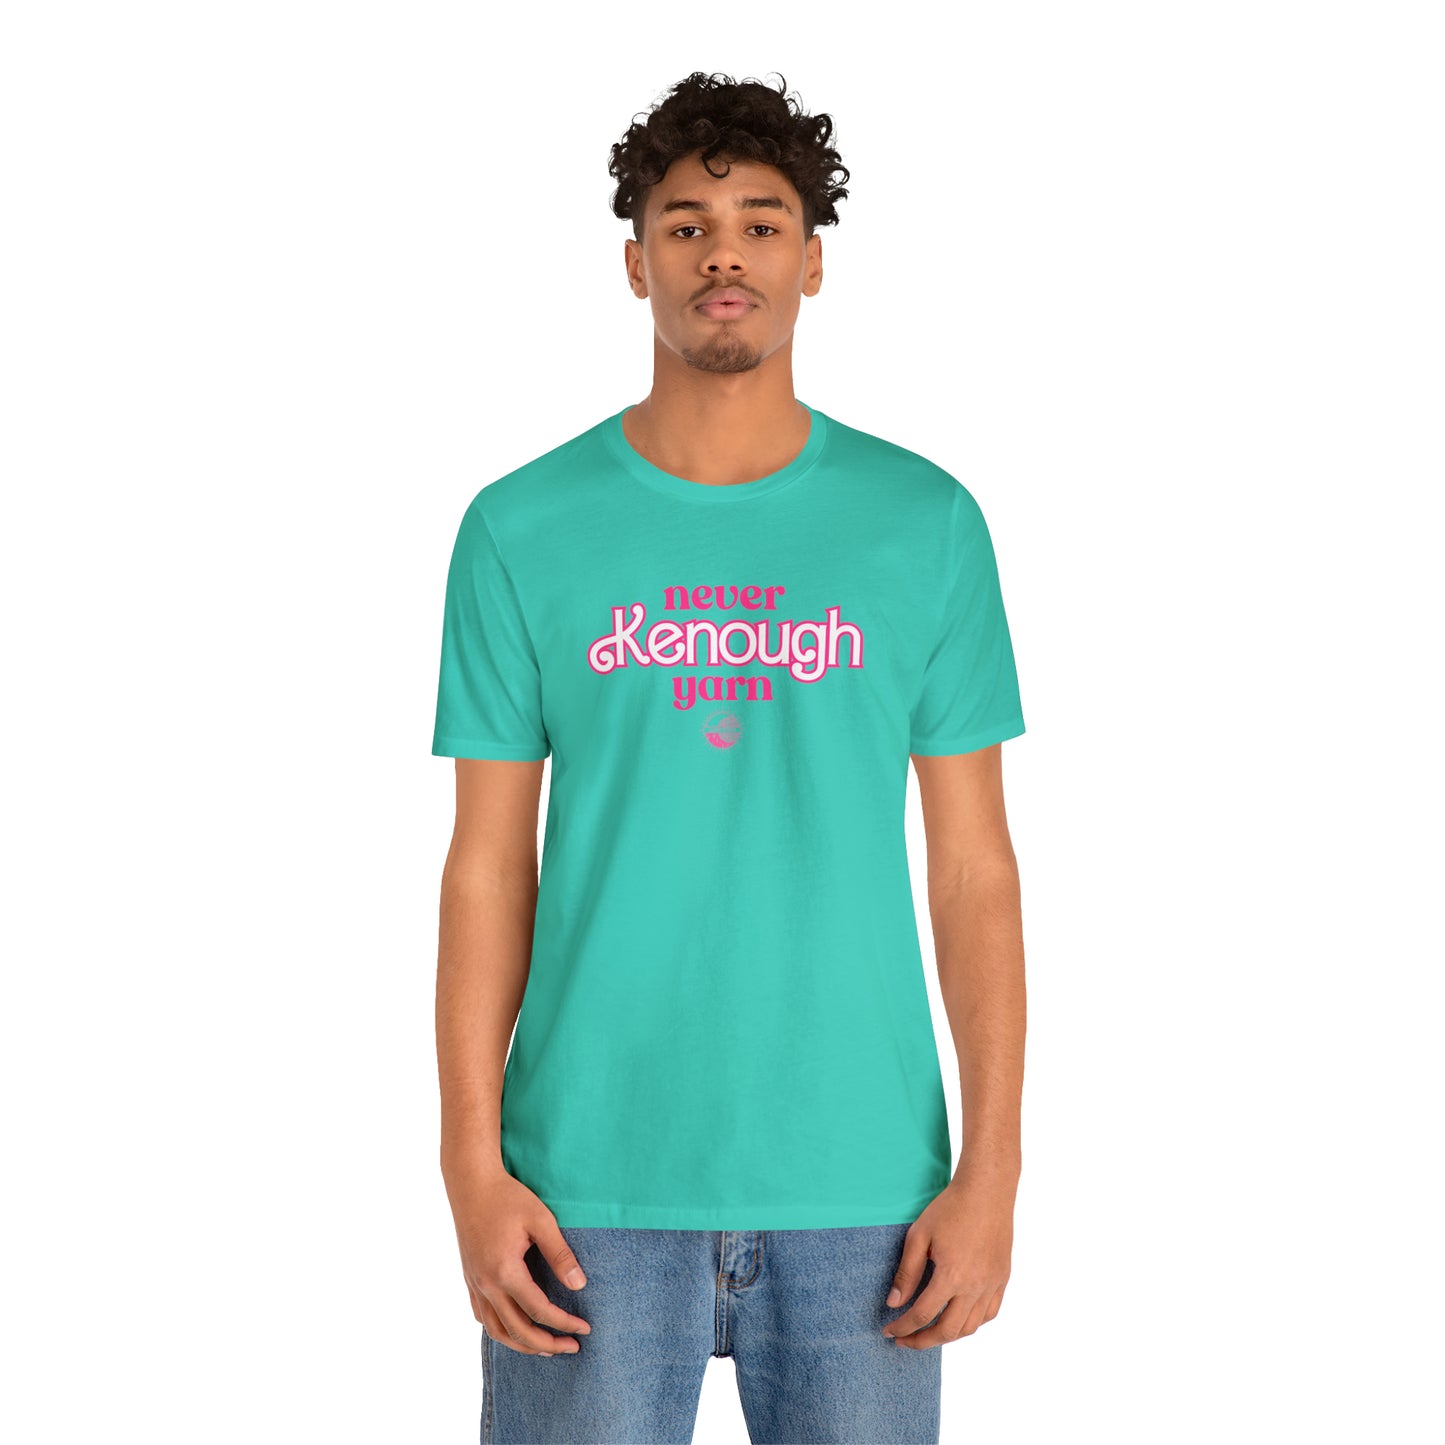 Never Kenough Yarn - Solid Color Jersey Classic Fit Tee